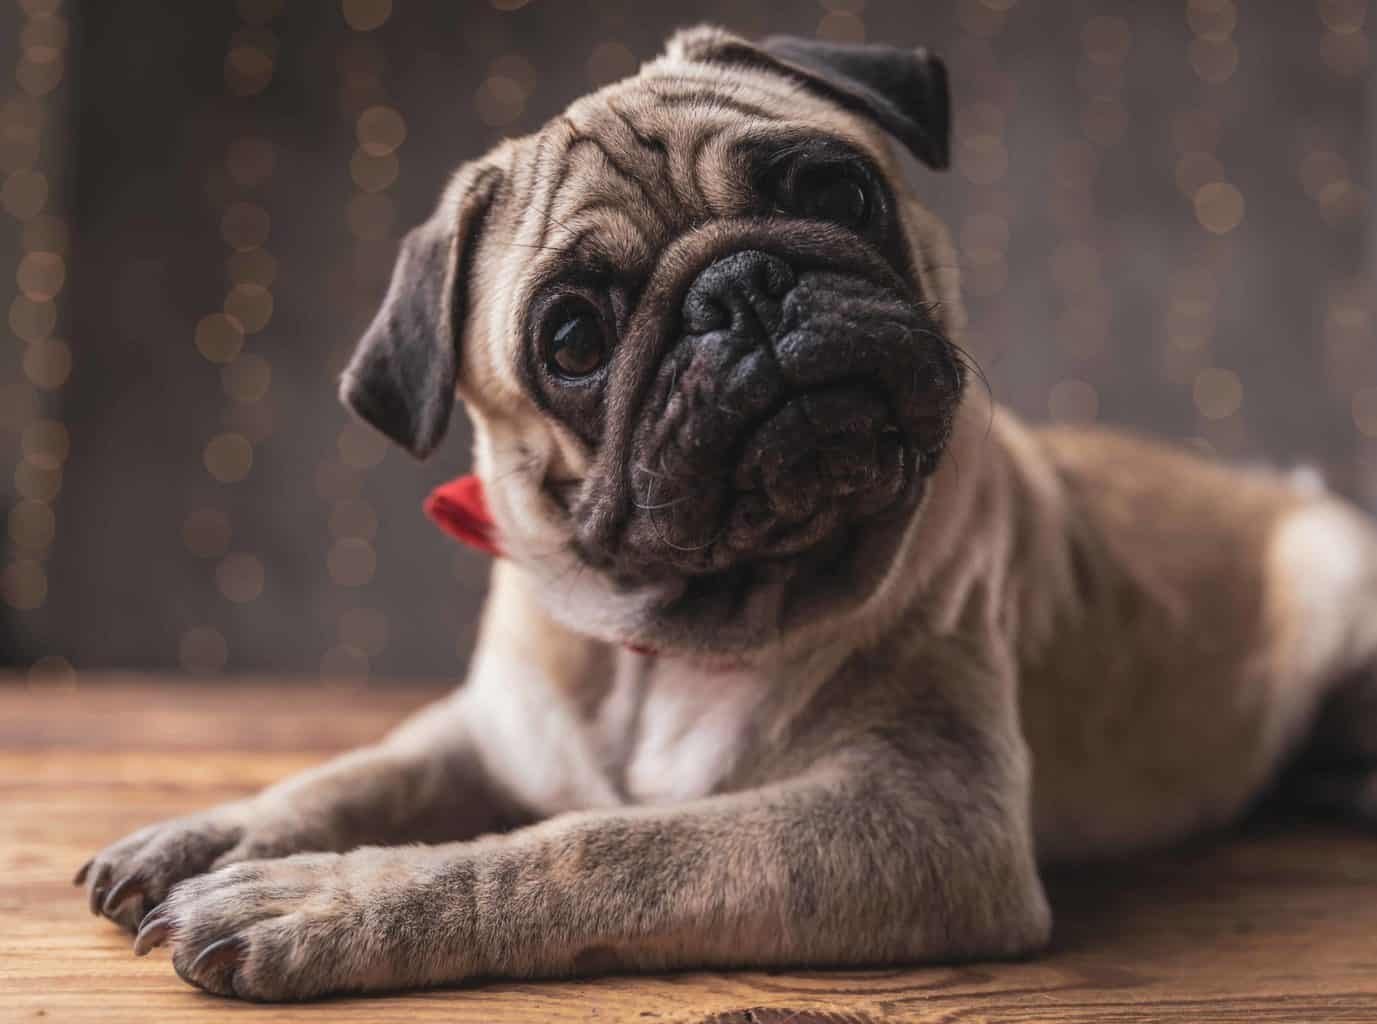 Confused pug tilts his head. Puppies and dogs that exhibit signs and symptoms of canine autism tend to be aloof and interact less with their people.